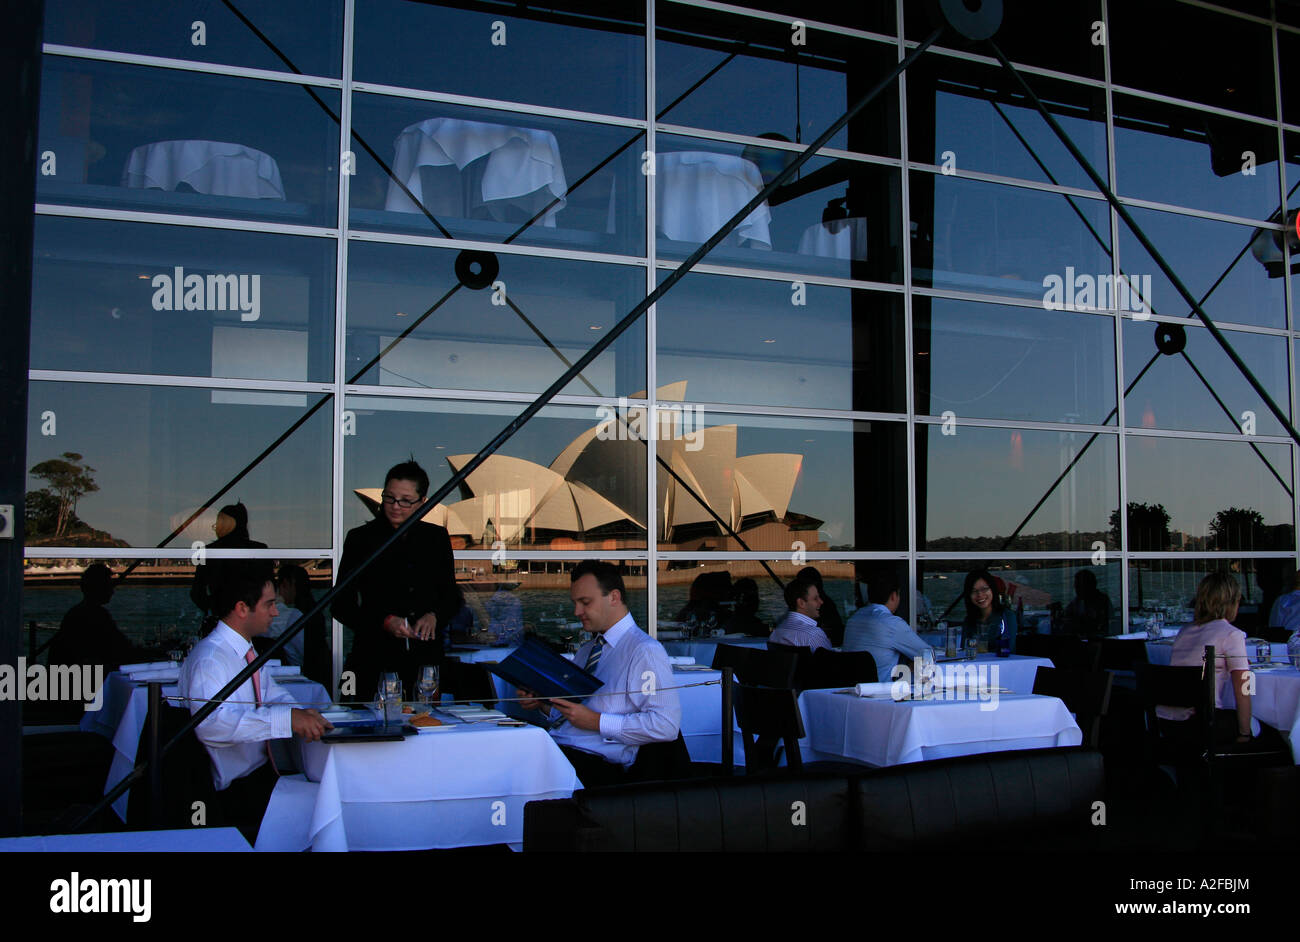 The Sydney Opera House on a beautiful day in reflection of the Sydney Passenger terminal with restaurant goers Stock Photo